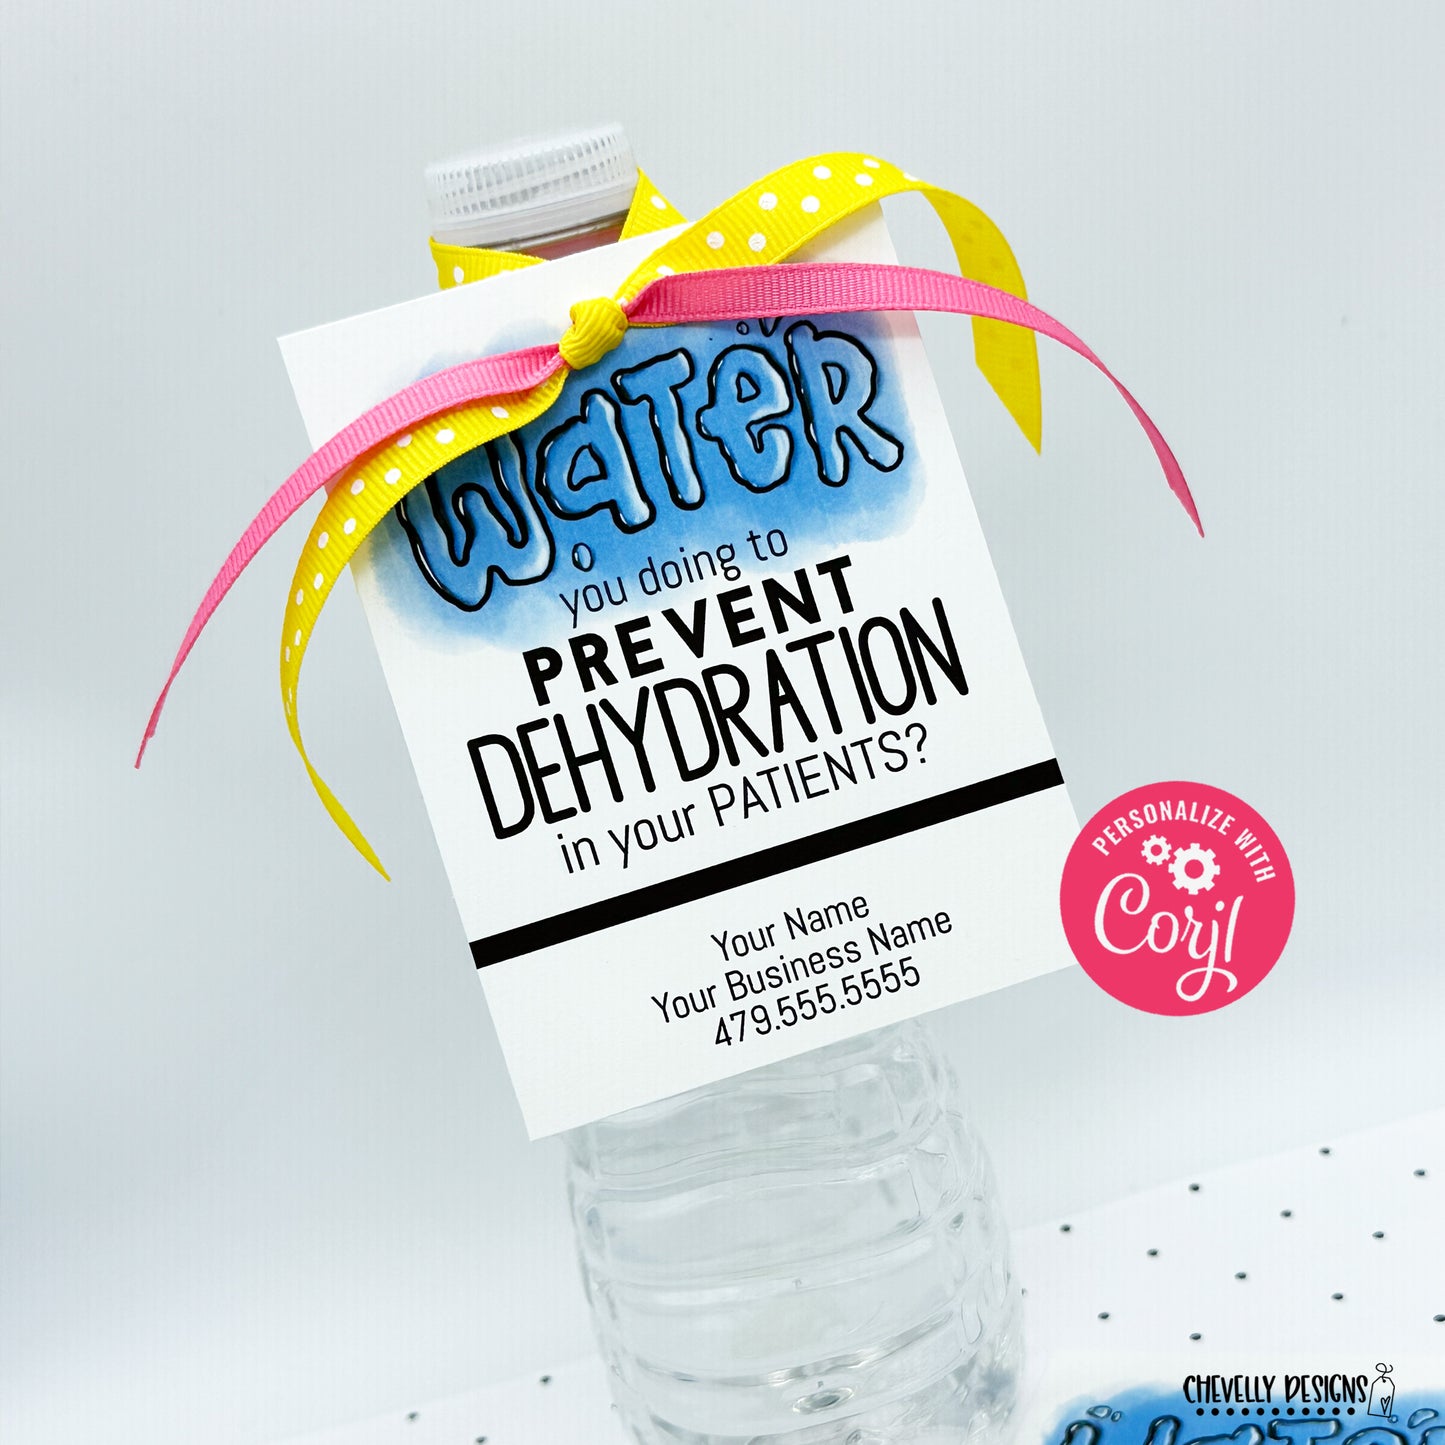 EDITABLE - Water You Doing to Prevent Dehydration - Printable Patient Care Marketing Tags